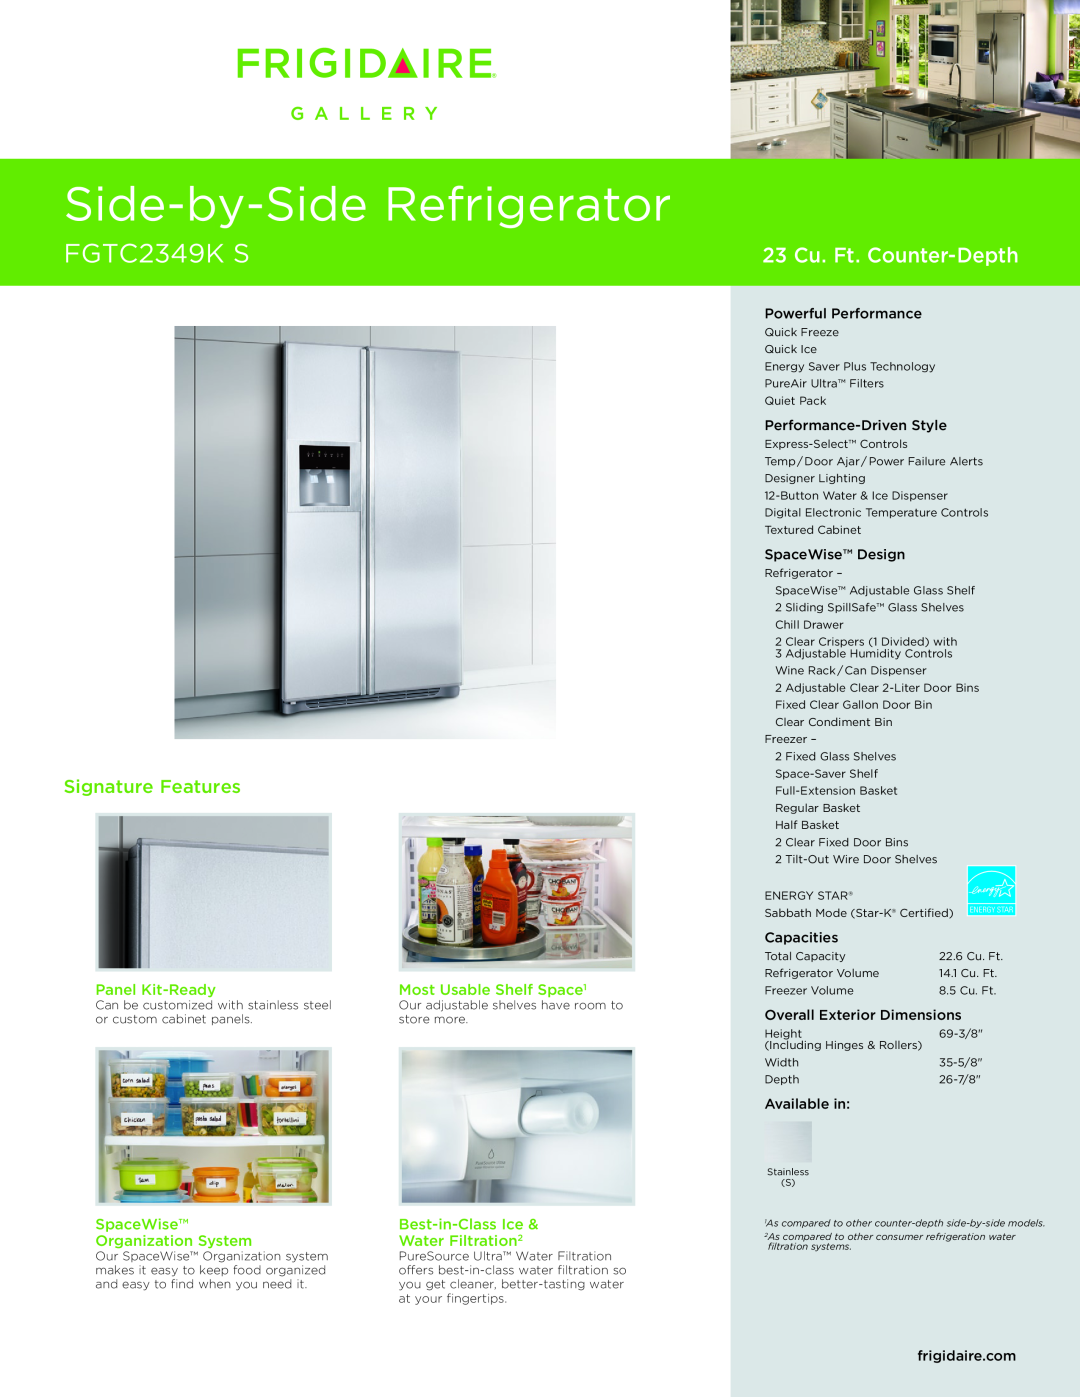 Frigidaire FGTC2349KS dimensions Panel Kit-Ready, Most Usable Shelf Space1, SpaceWise, Best-in-ClassIce, Water Filtration2 